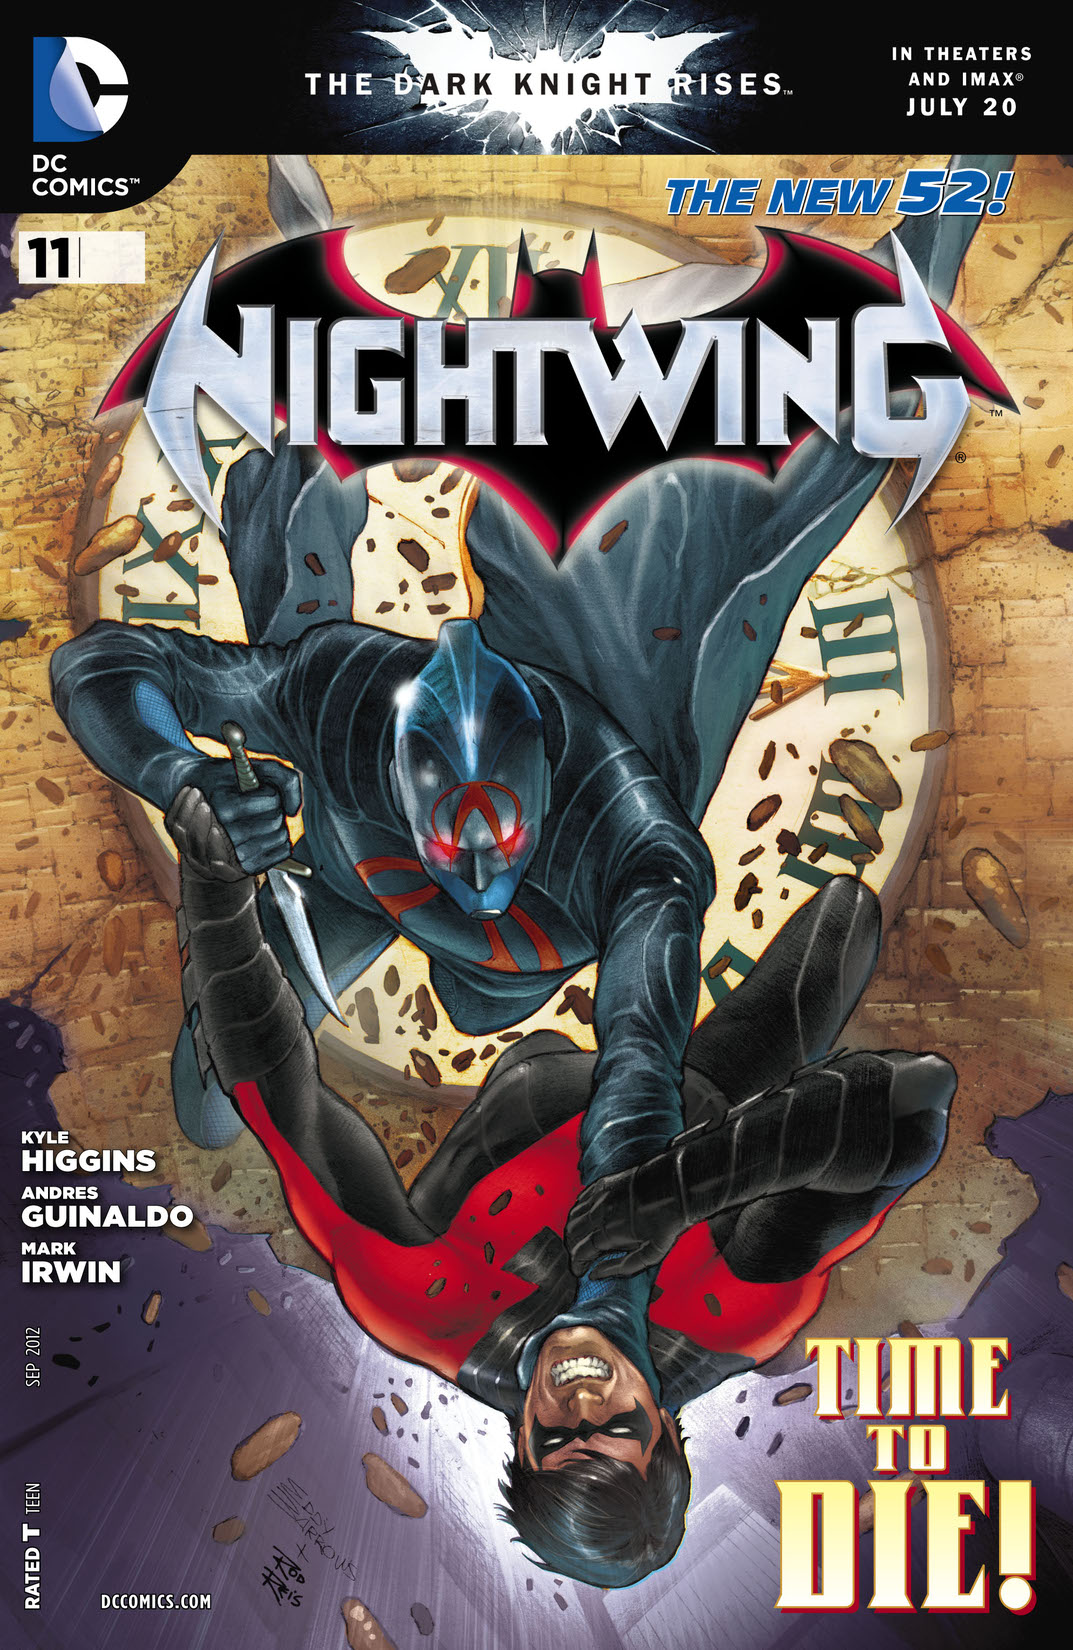 Nightwing (2011-) #11 preview images